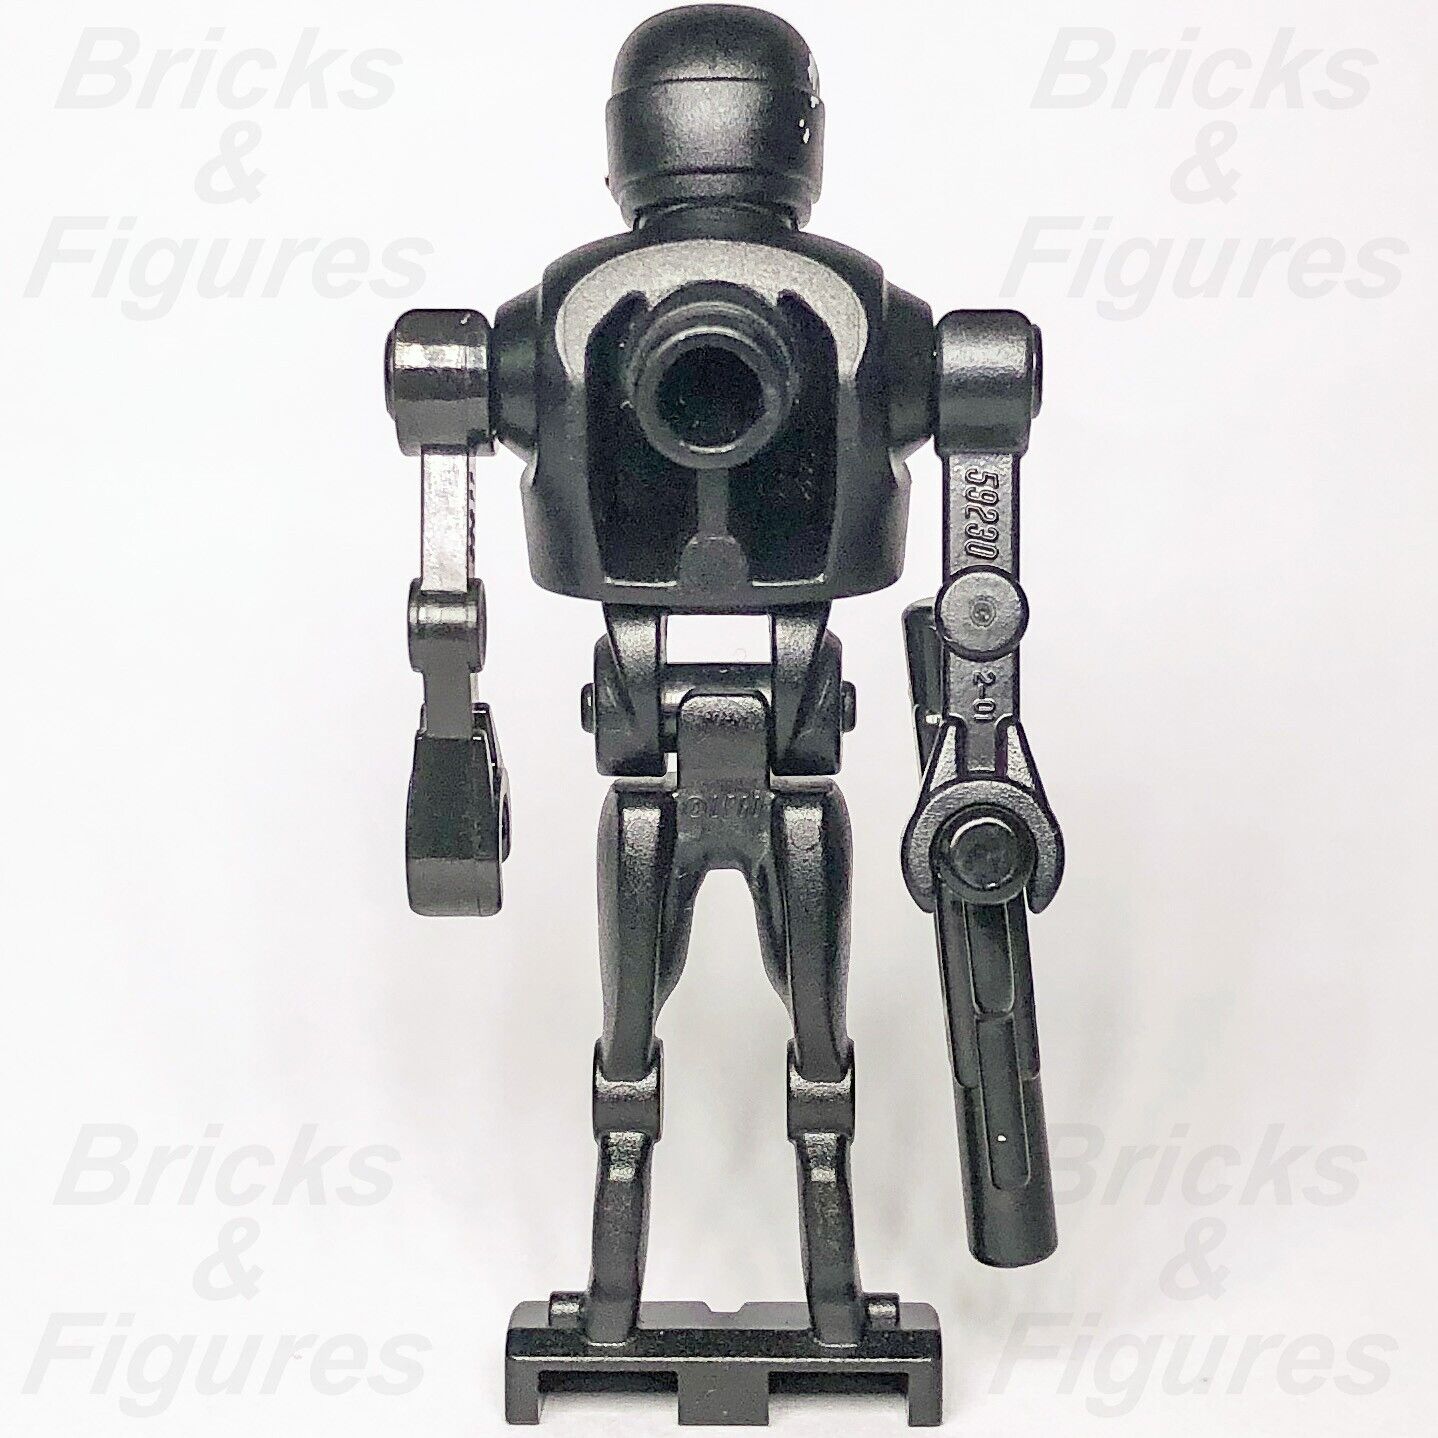 LEGO Star Wars K-2SO Security Droid Minifigure Rogue One sw0782 75156 Minifig 3